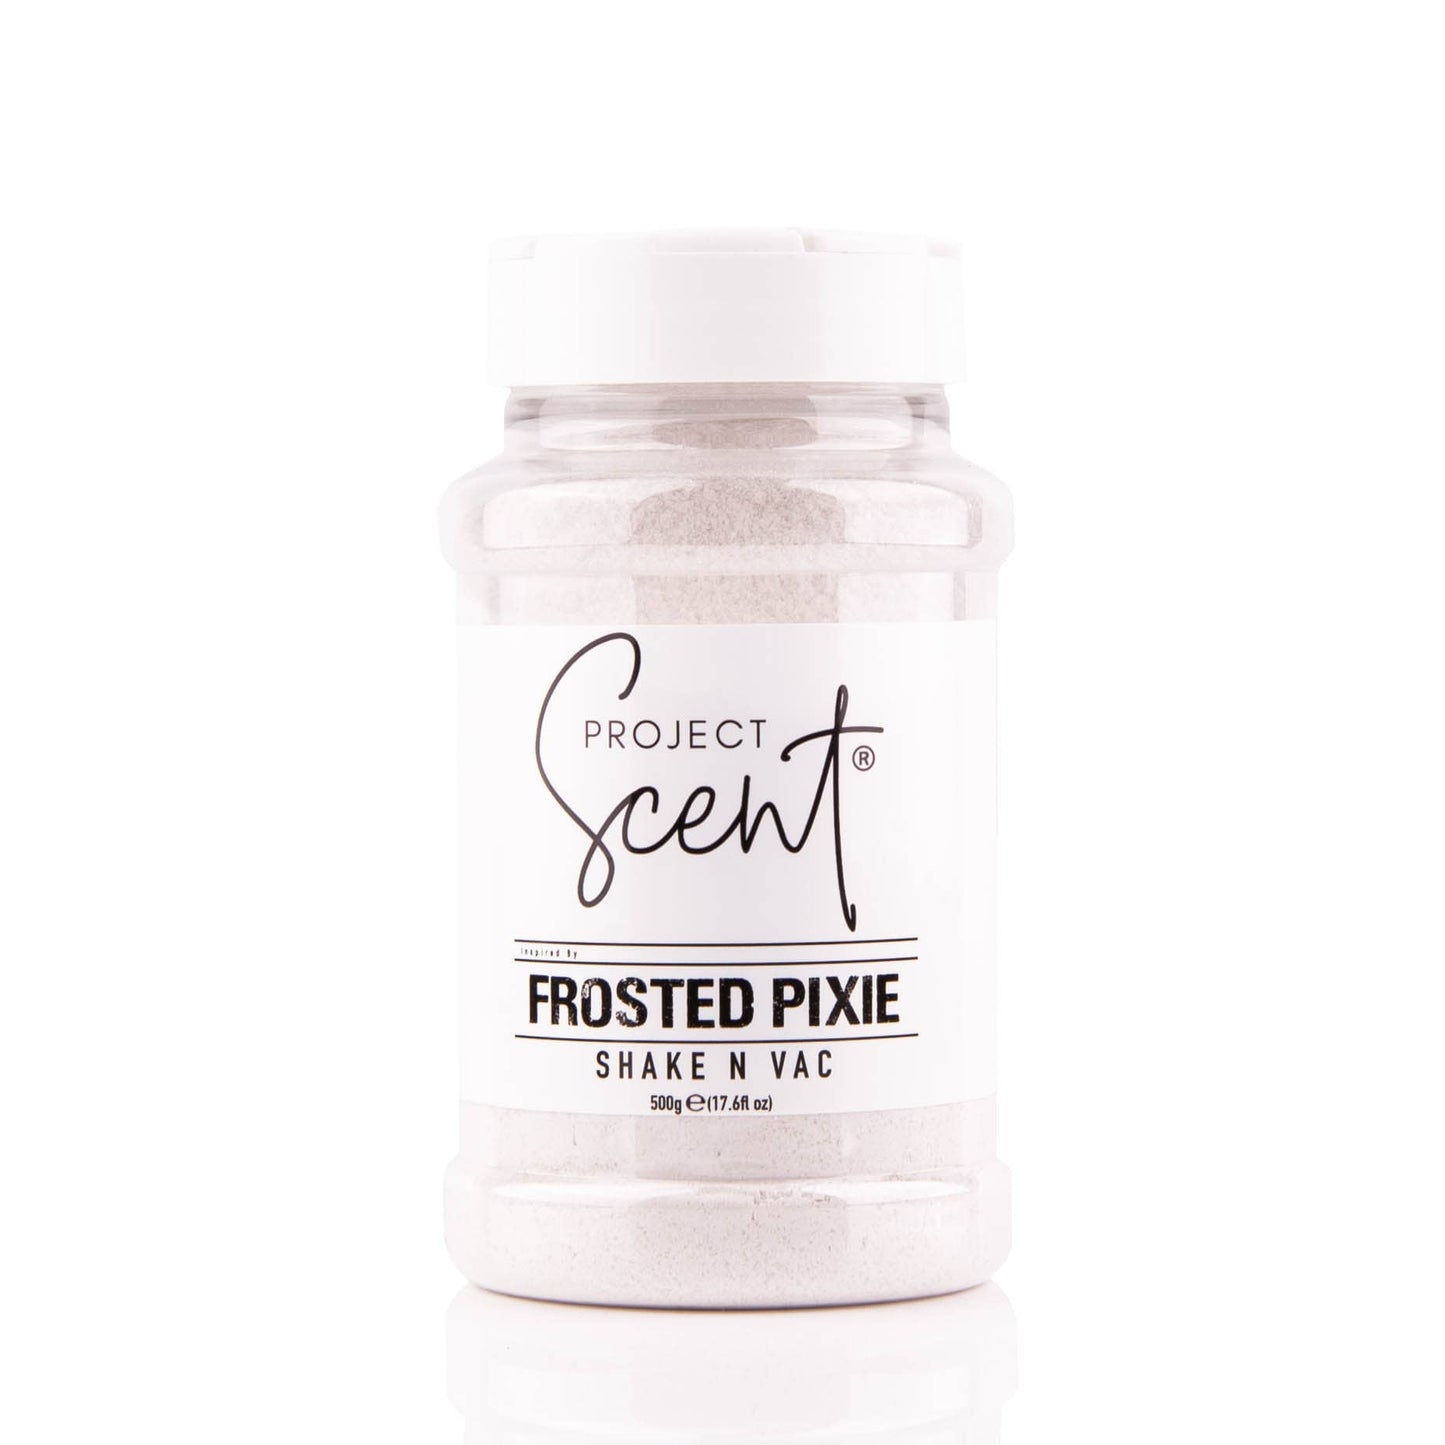 Project Scent Frosted Pixie Carpet Sprinkles Shake N Vac 500g